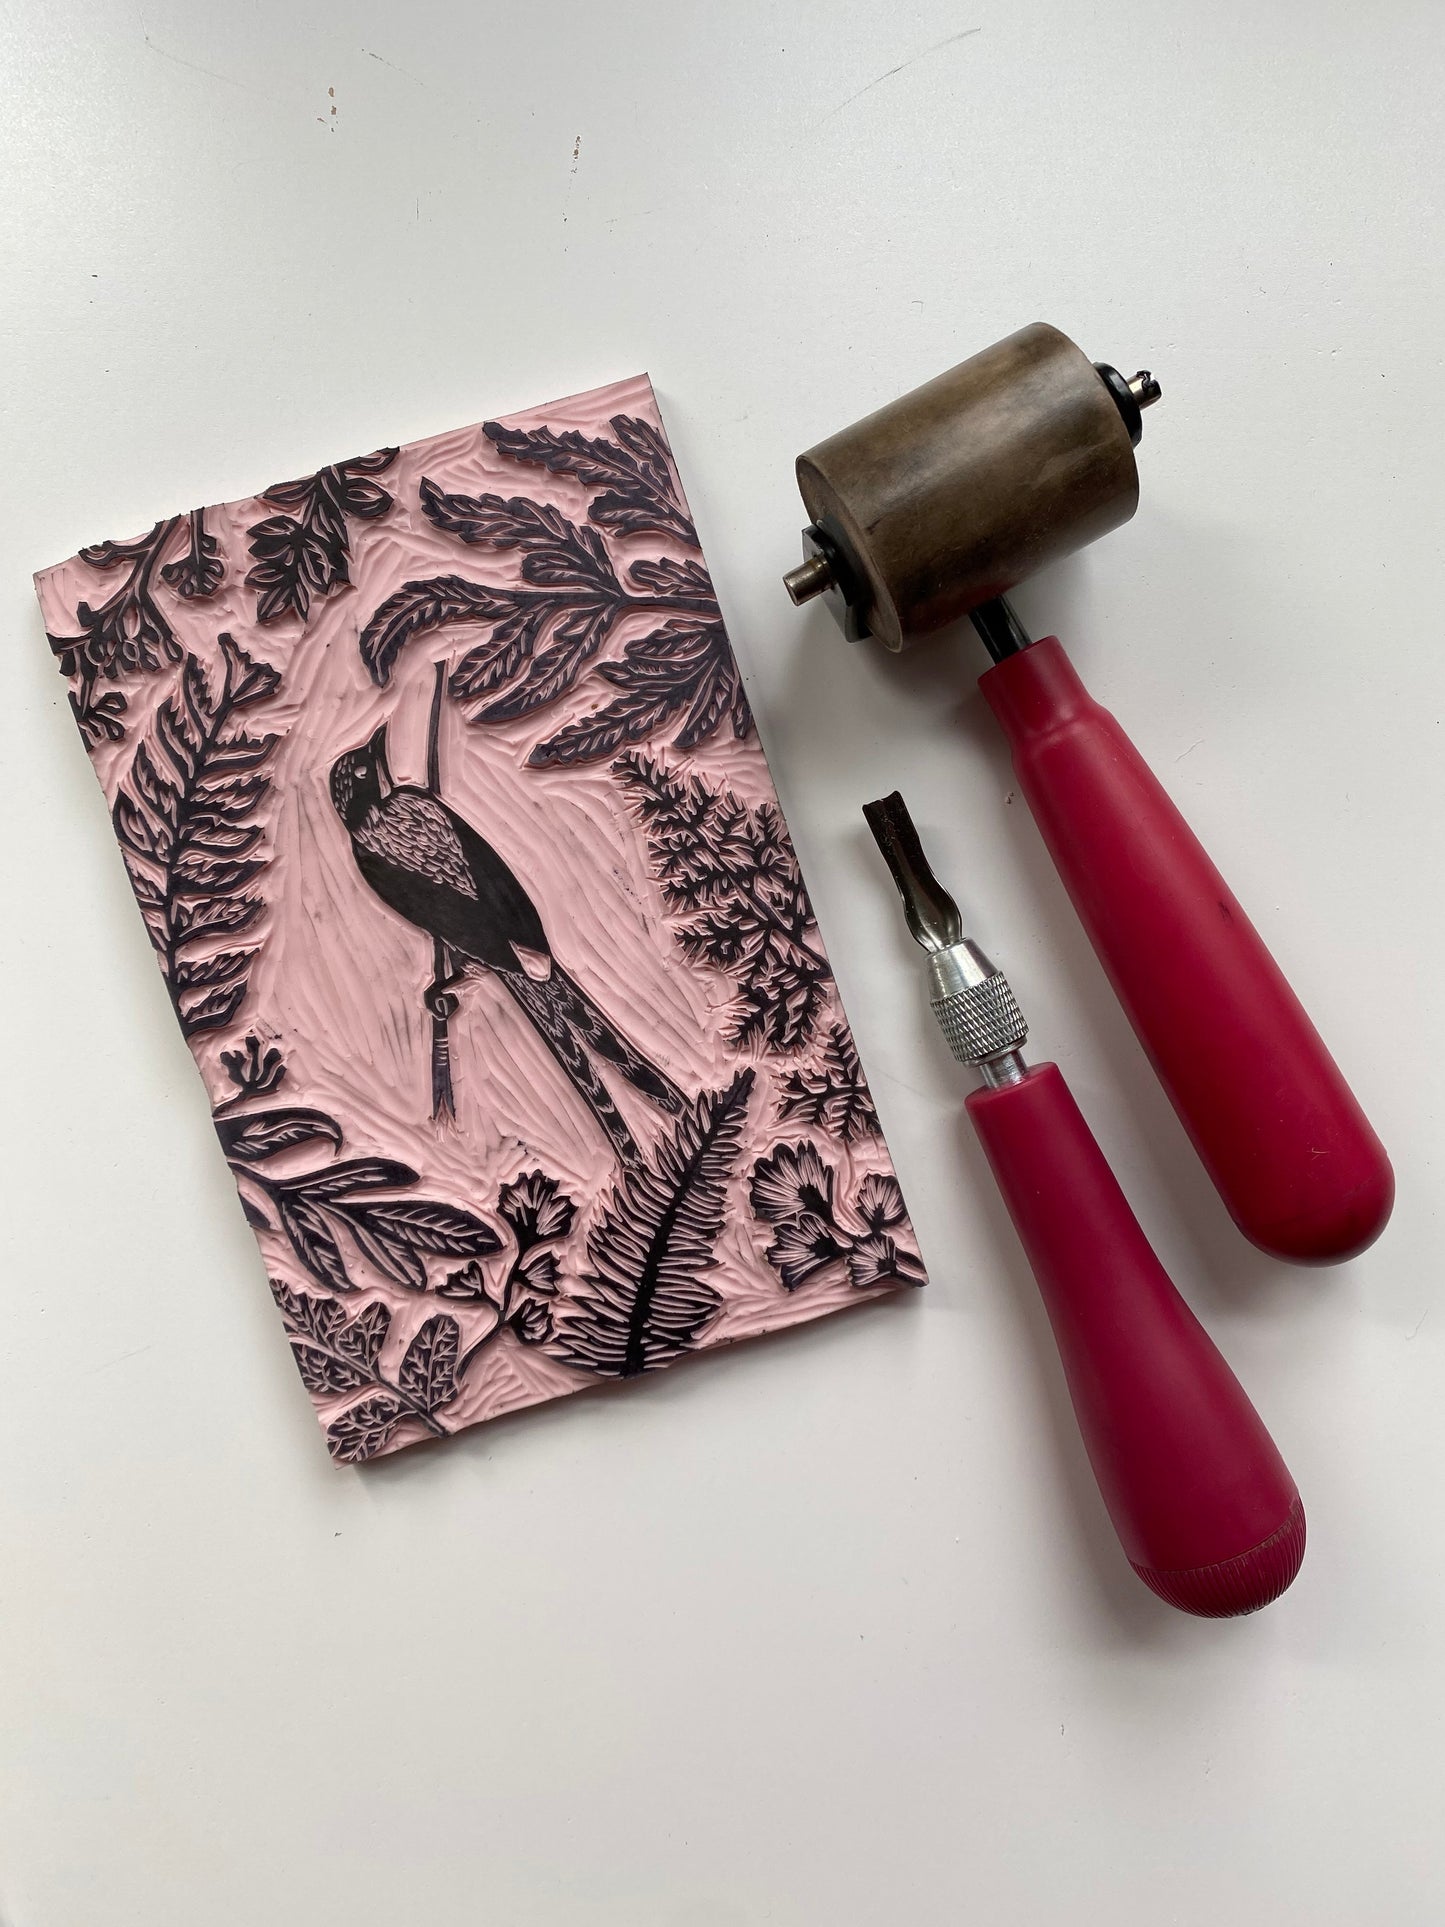 Intro to Block Printing - March 10